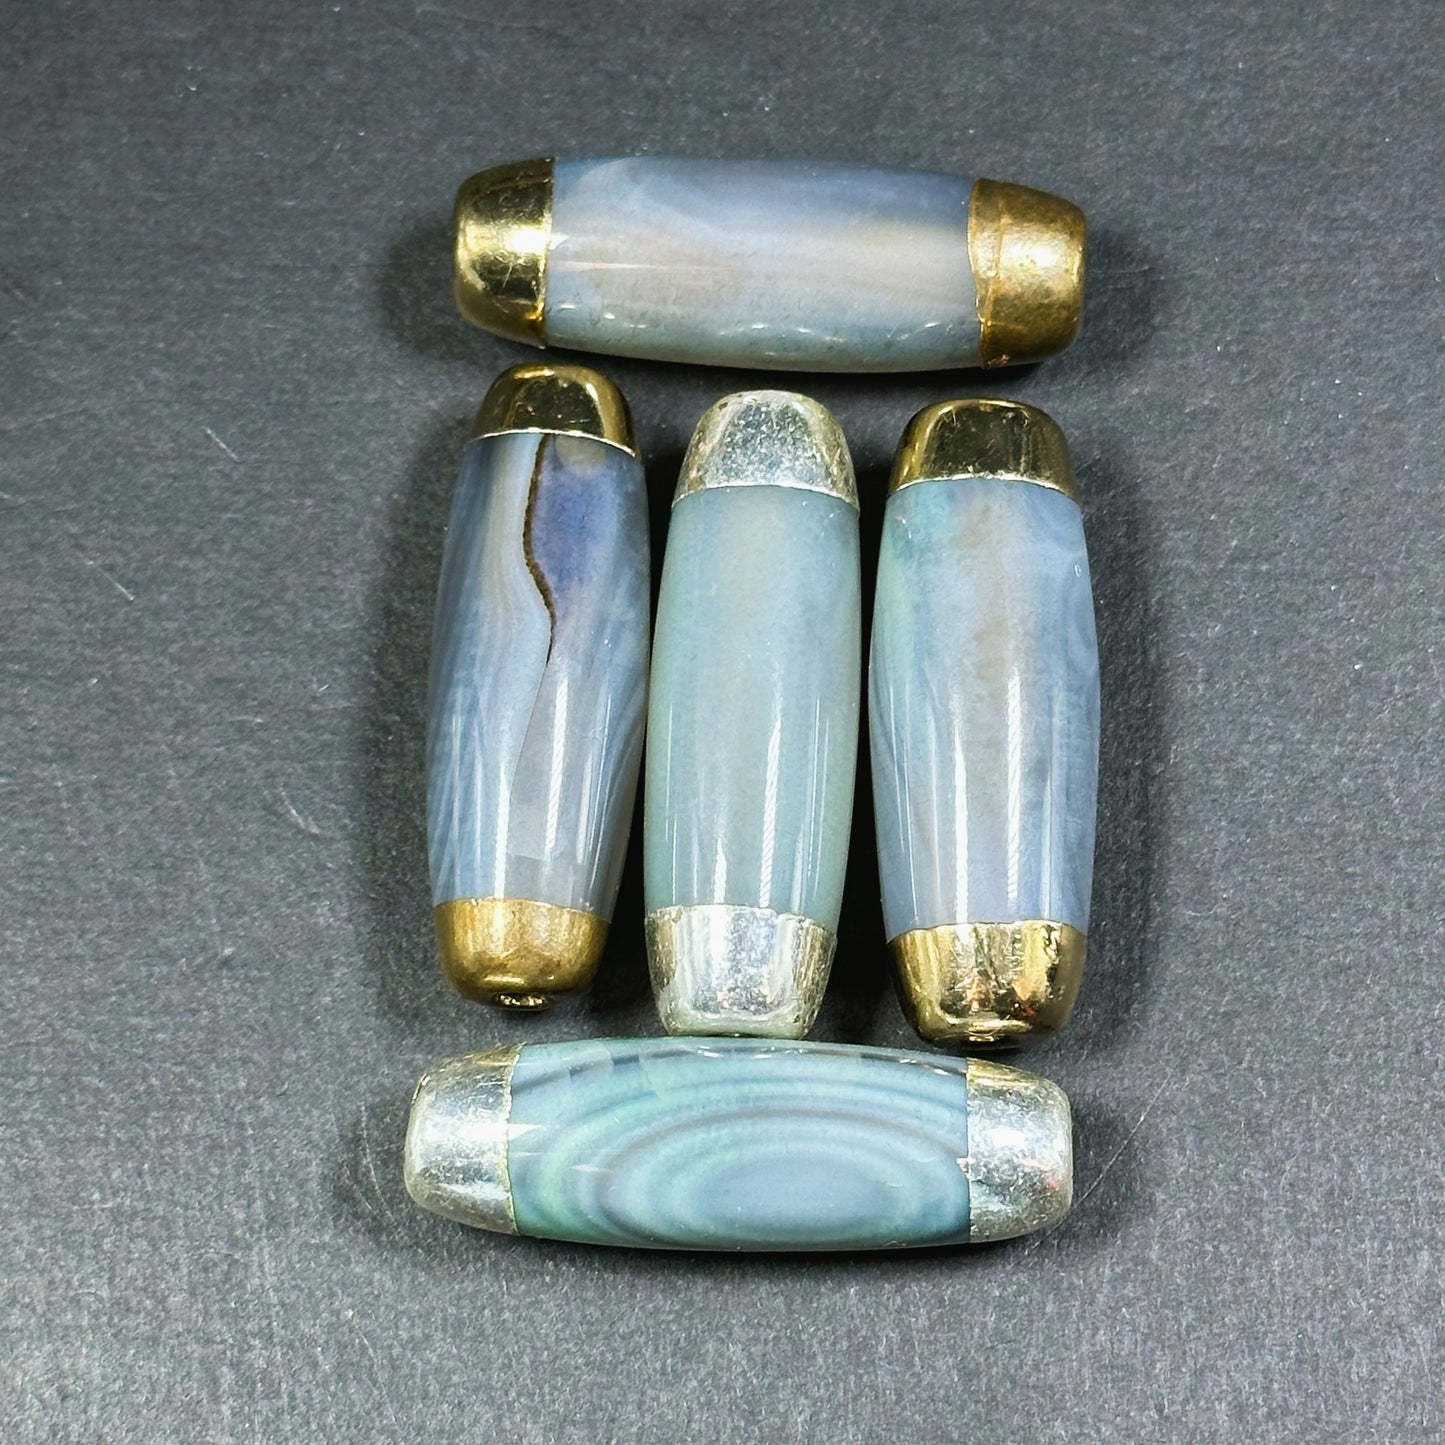 Natural Dragon Skin Agate Gemstone 40x14mm Barrel Shape Bead, Gorgeous Clear Green-Blue Color Stone Beads, Filled Edges, Loose Focal Beads